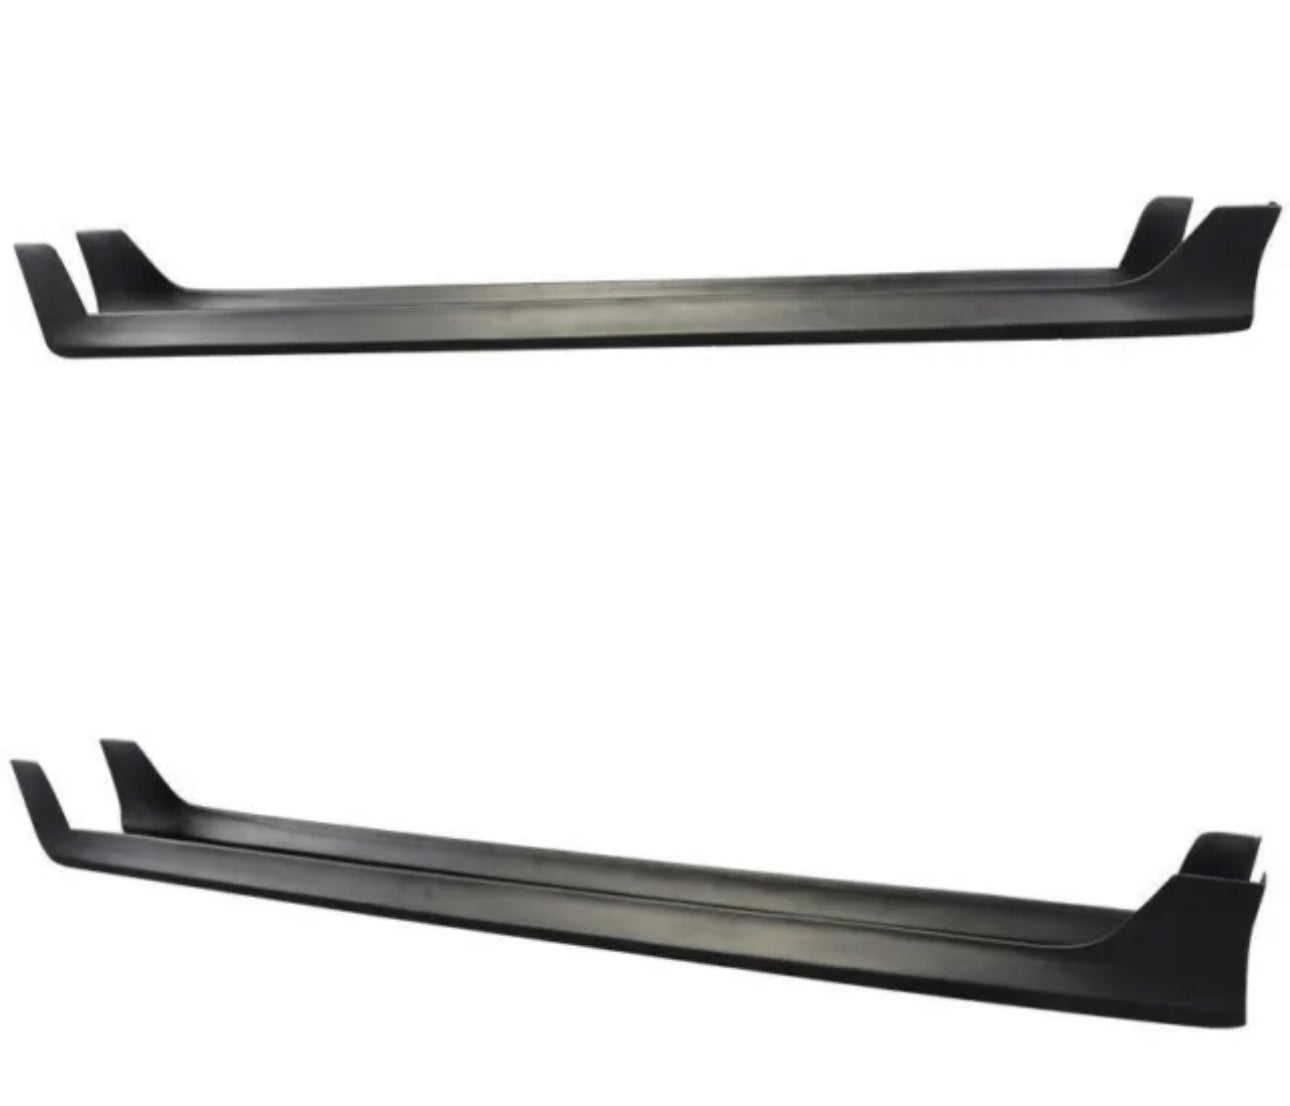 FIT FOR 2008-2012 HONDA ACCORD 4DOOR OE STYLE SIDE SKIRTS PP